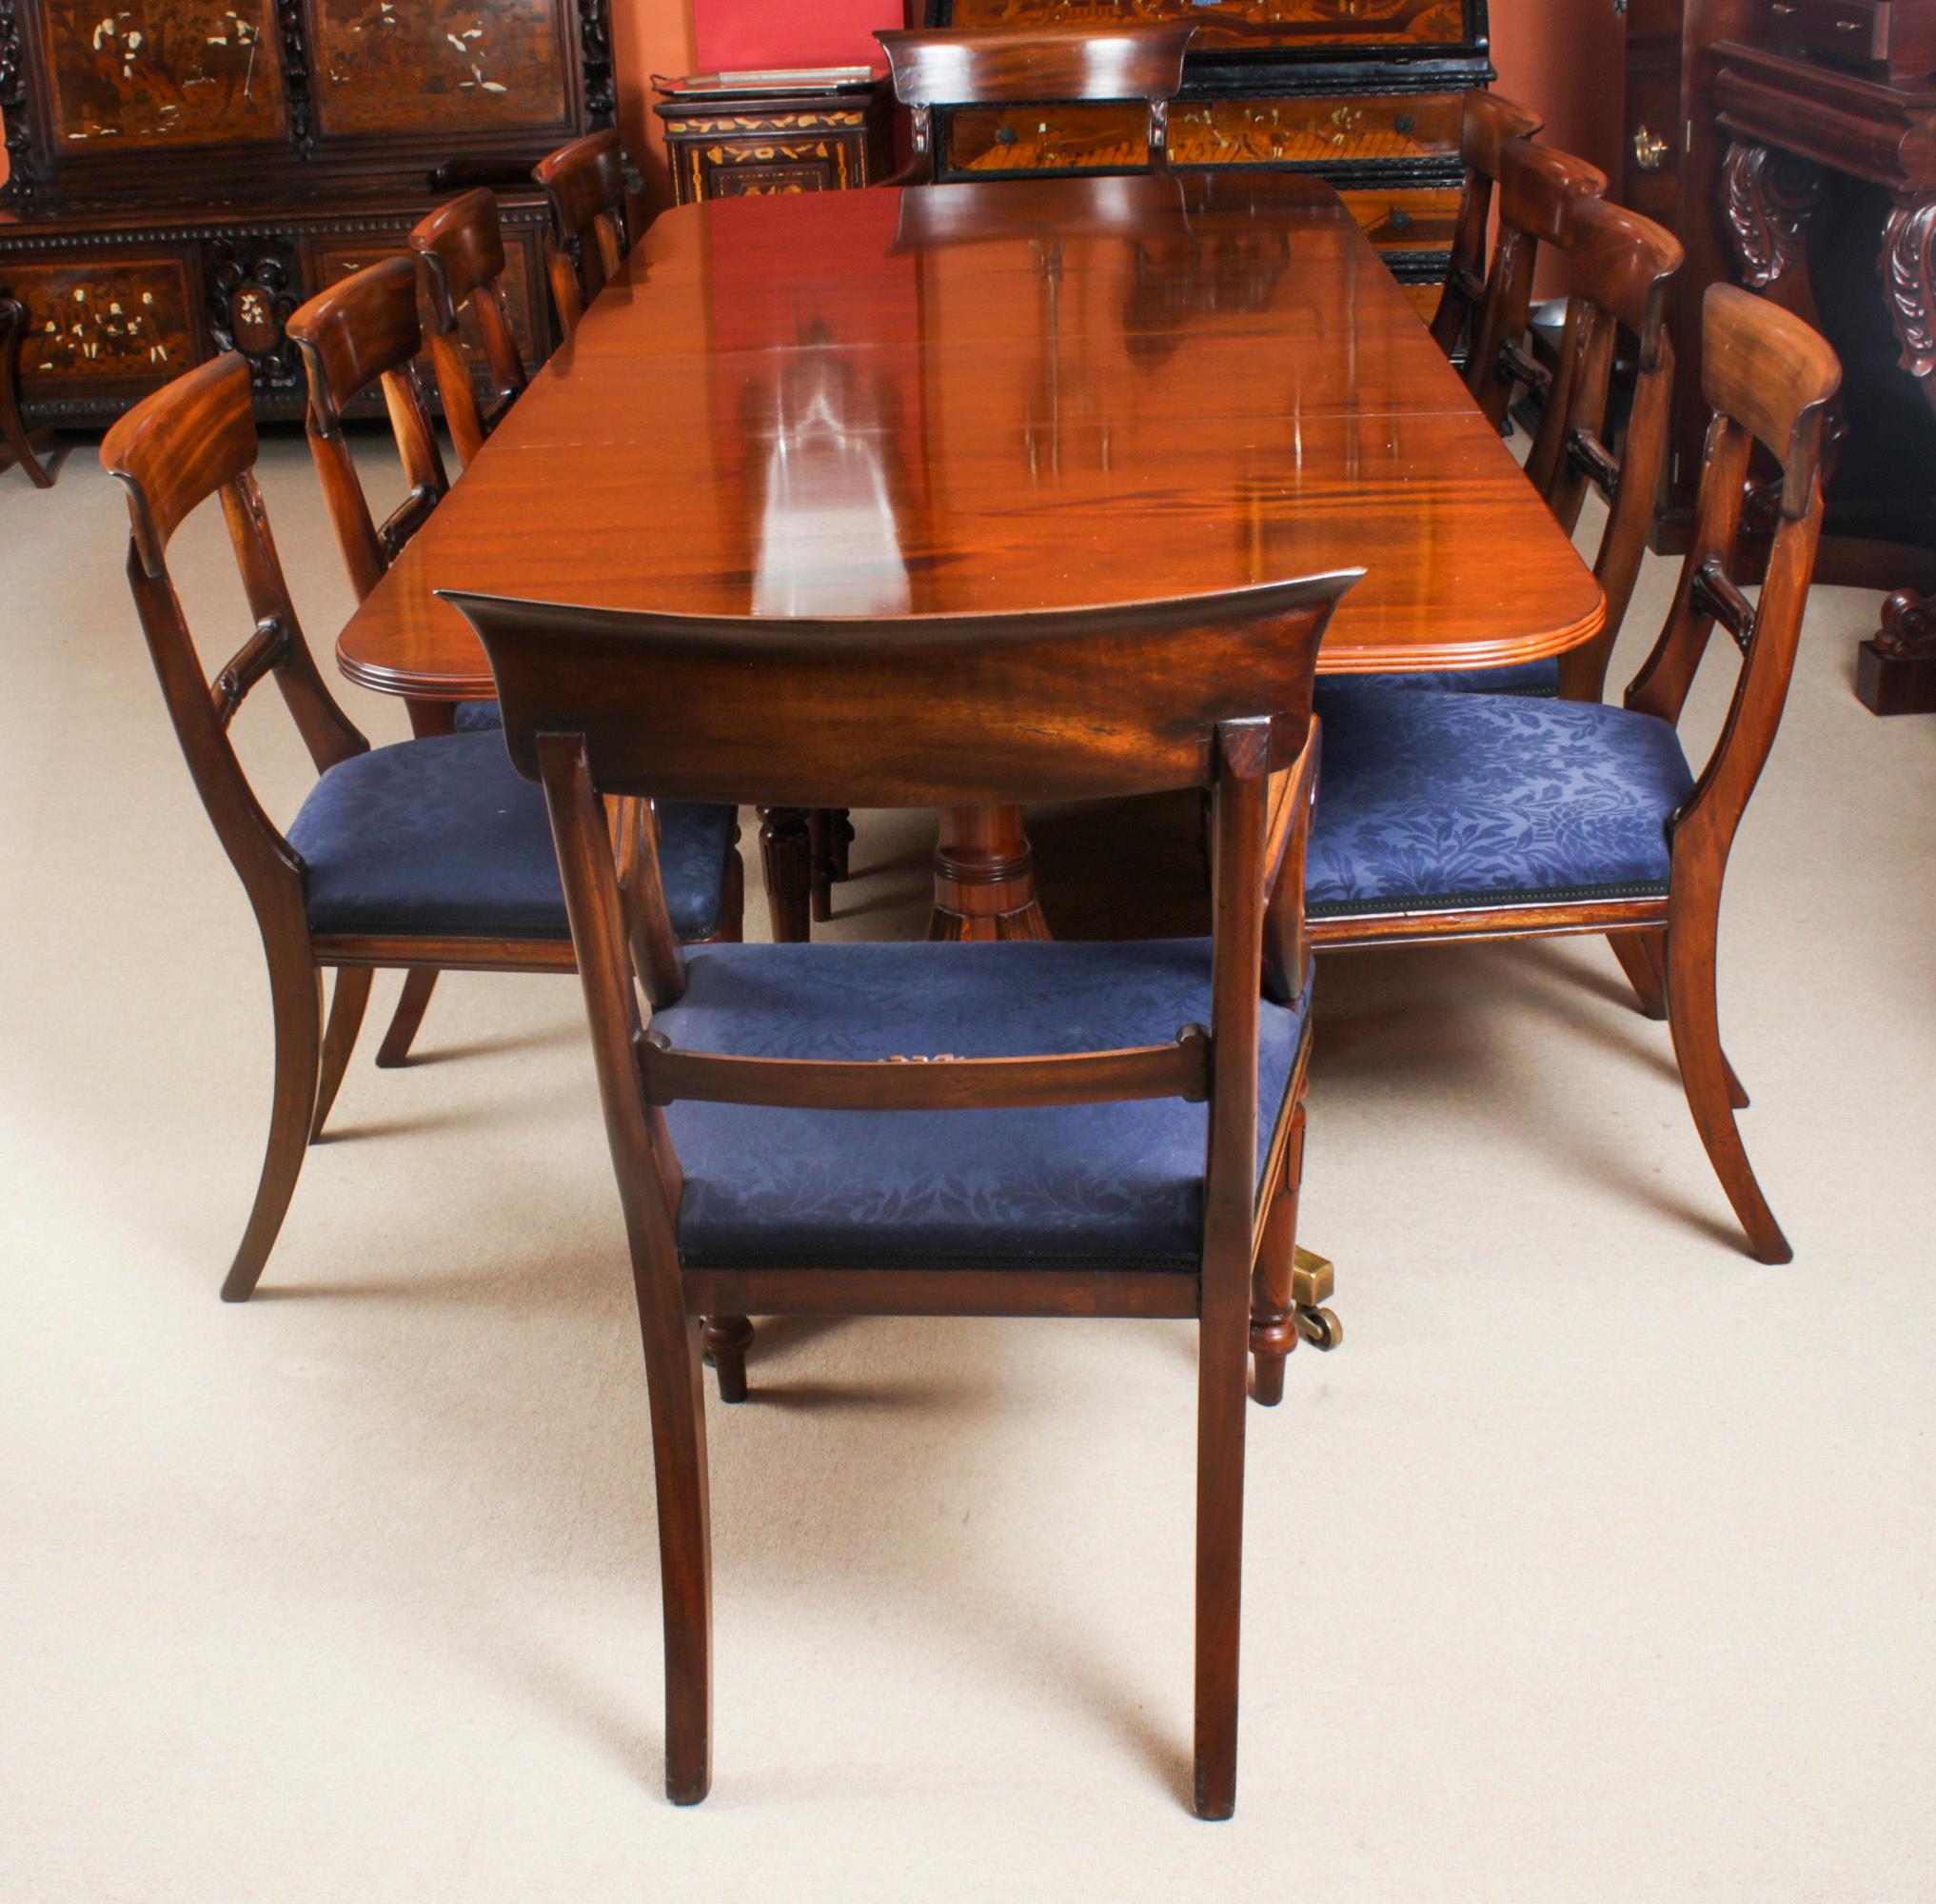 Regency Revival Vintage Twin Pillar Dining Table & 10 Dining Chairs by William Tillman 20th C